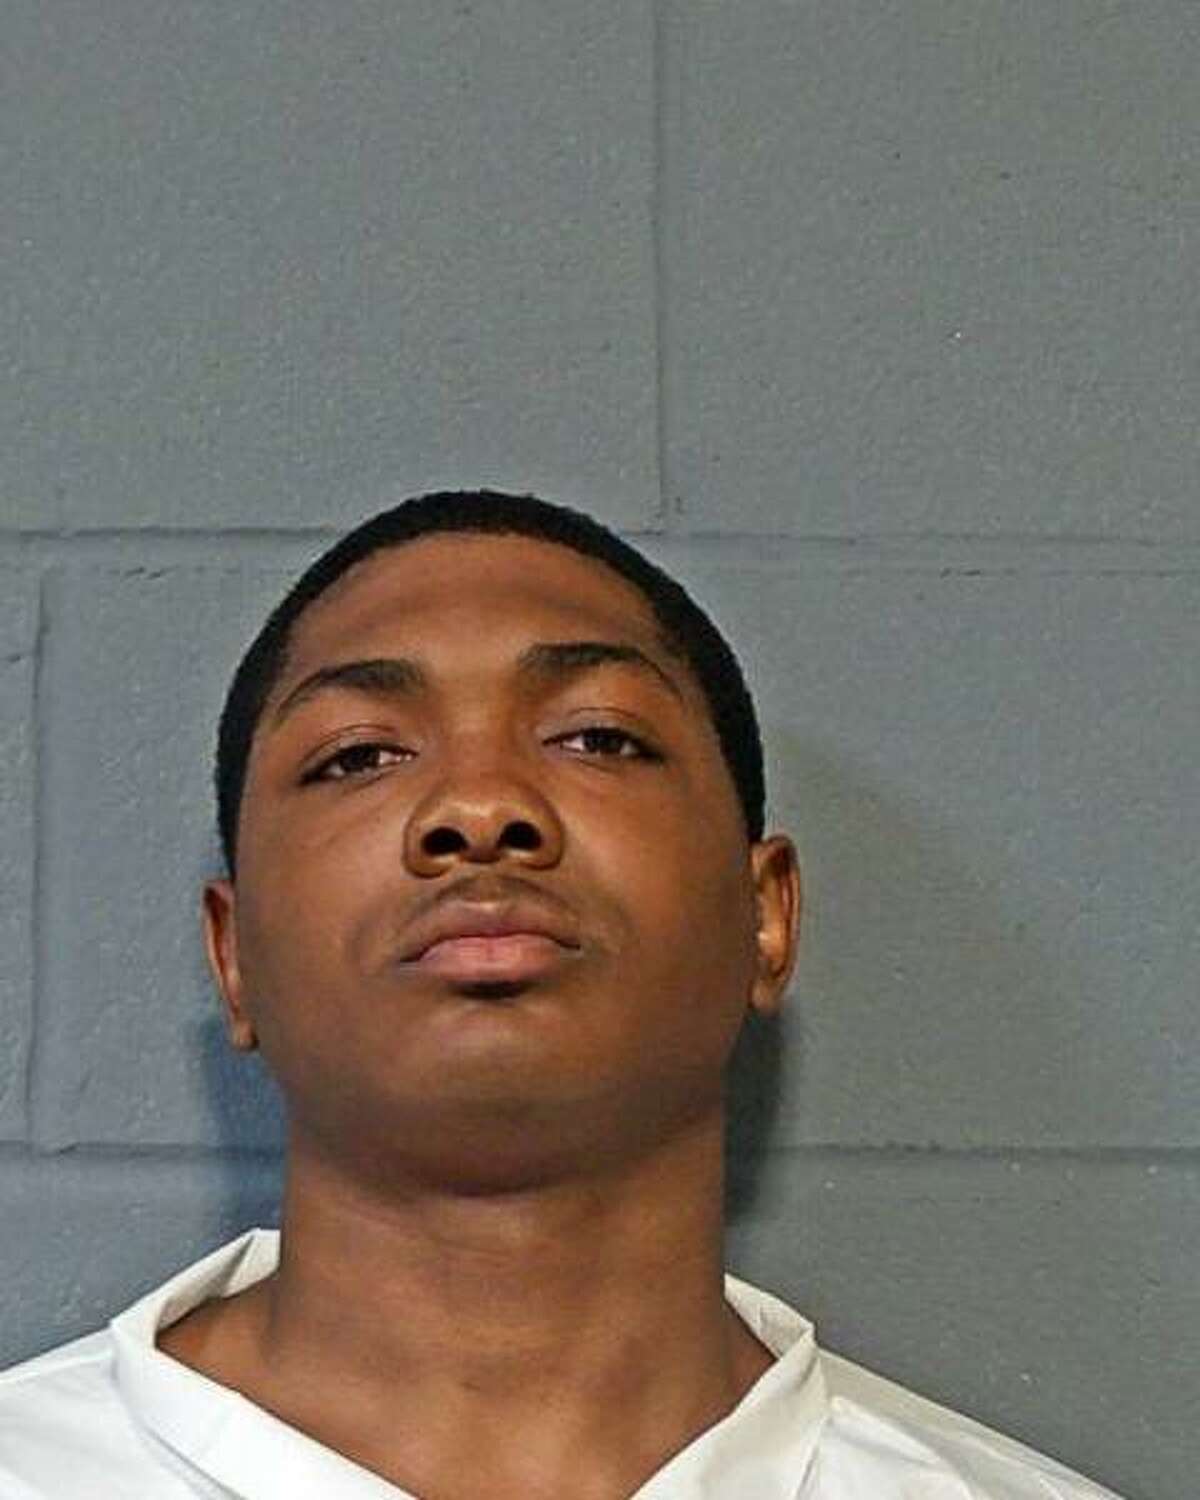 Jaquan Graham, 19, was charged with murder Tuesday, according to court records.